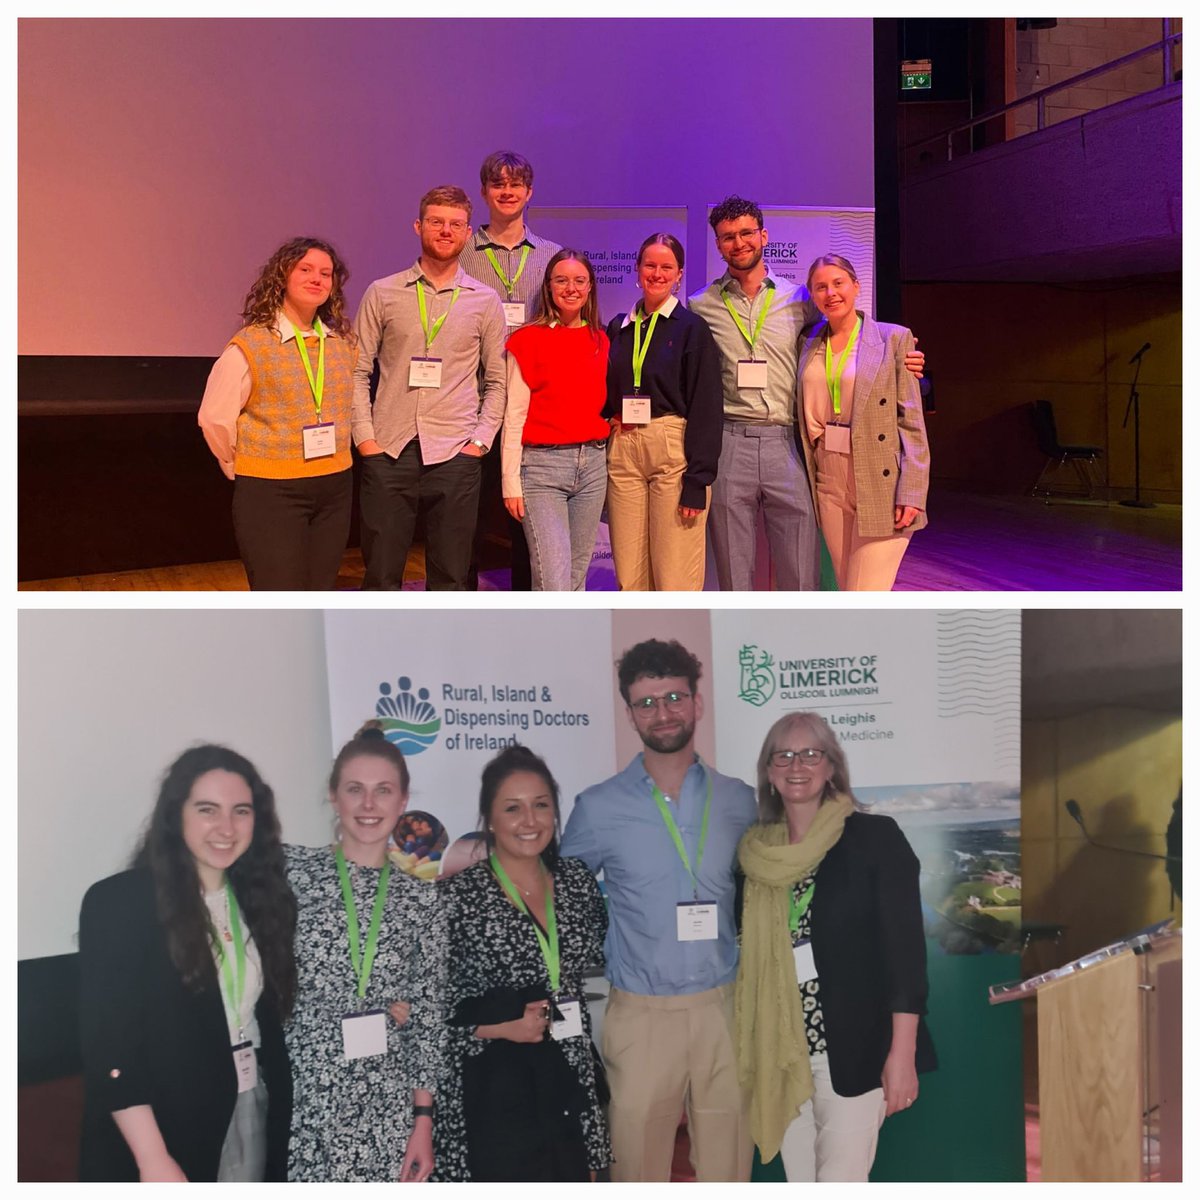 #RuralWONCA2022 Really enjoying the energy here at the conference in UL, with a great group of enthusiastic @NUIGMedicine students